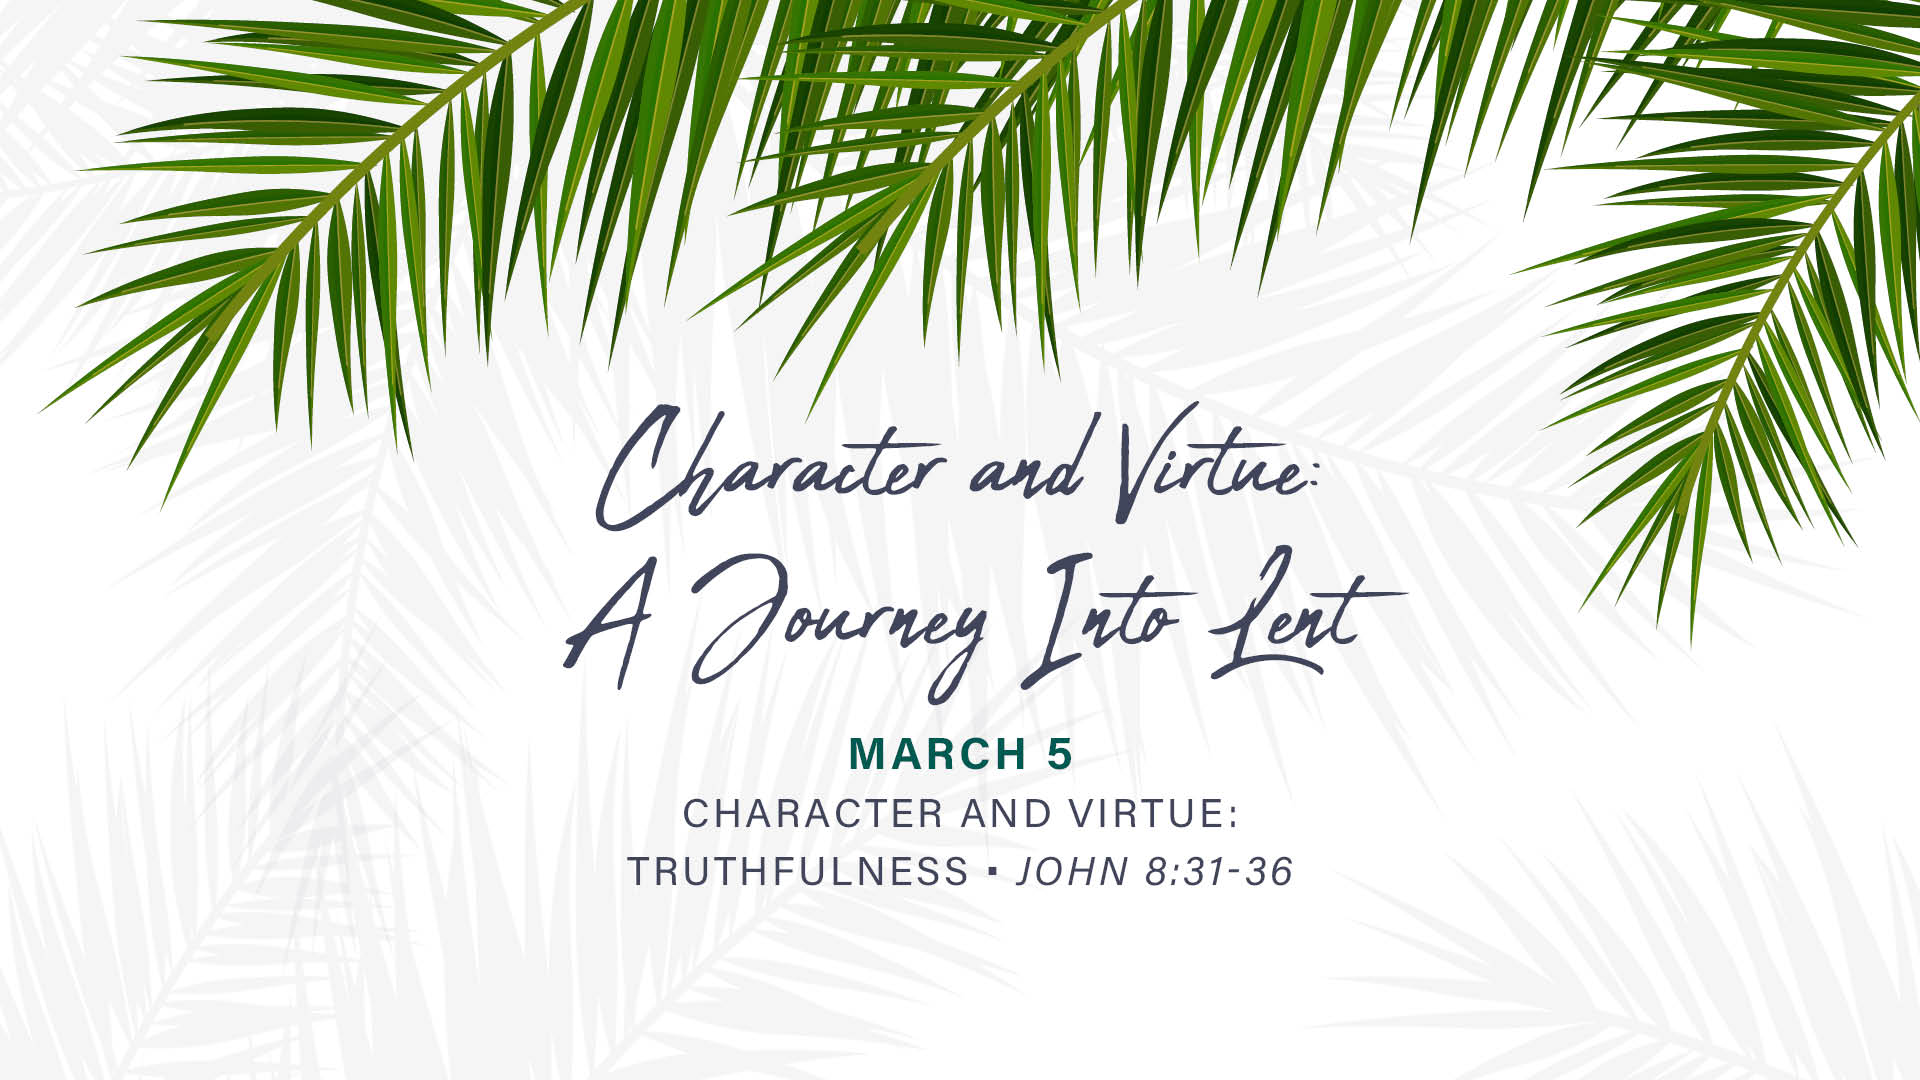 Character and Virtue: Truthfulness